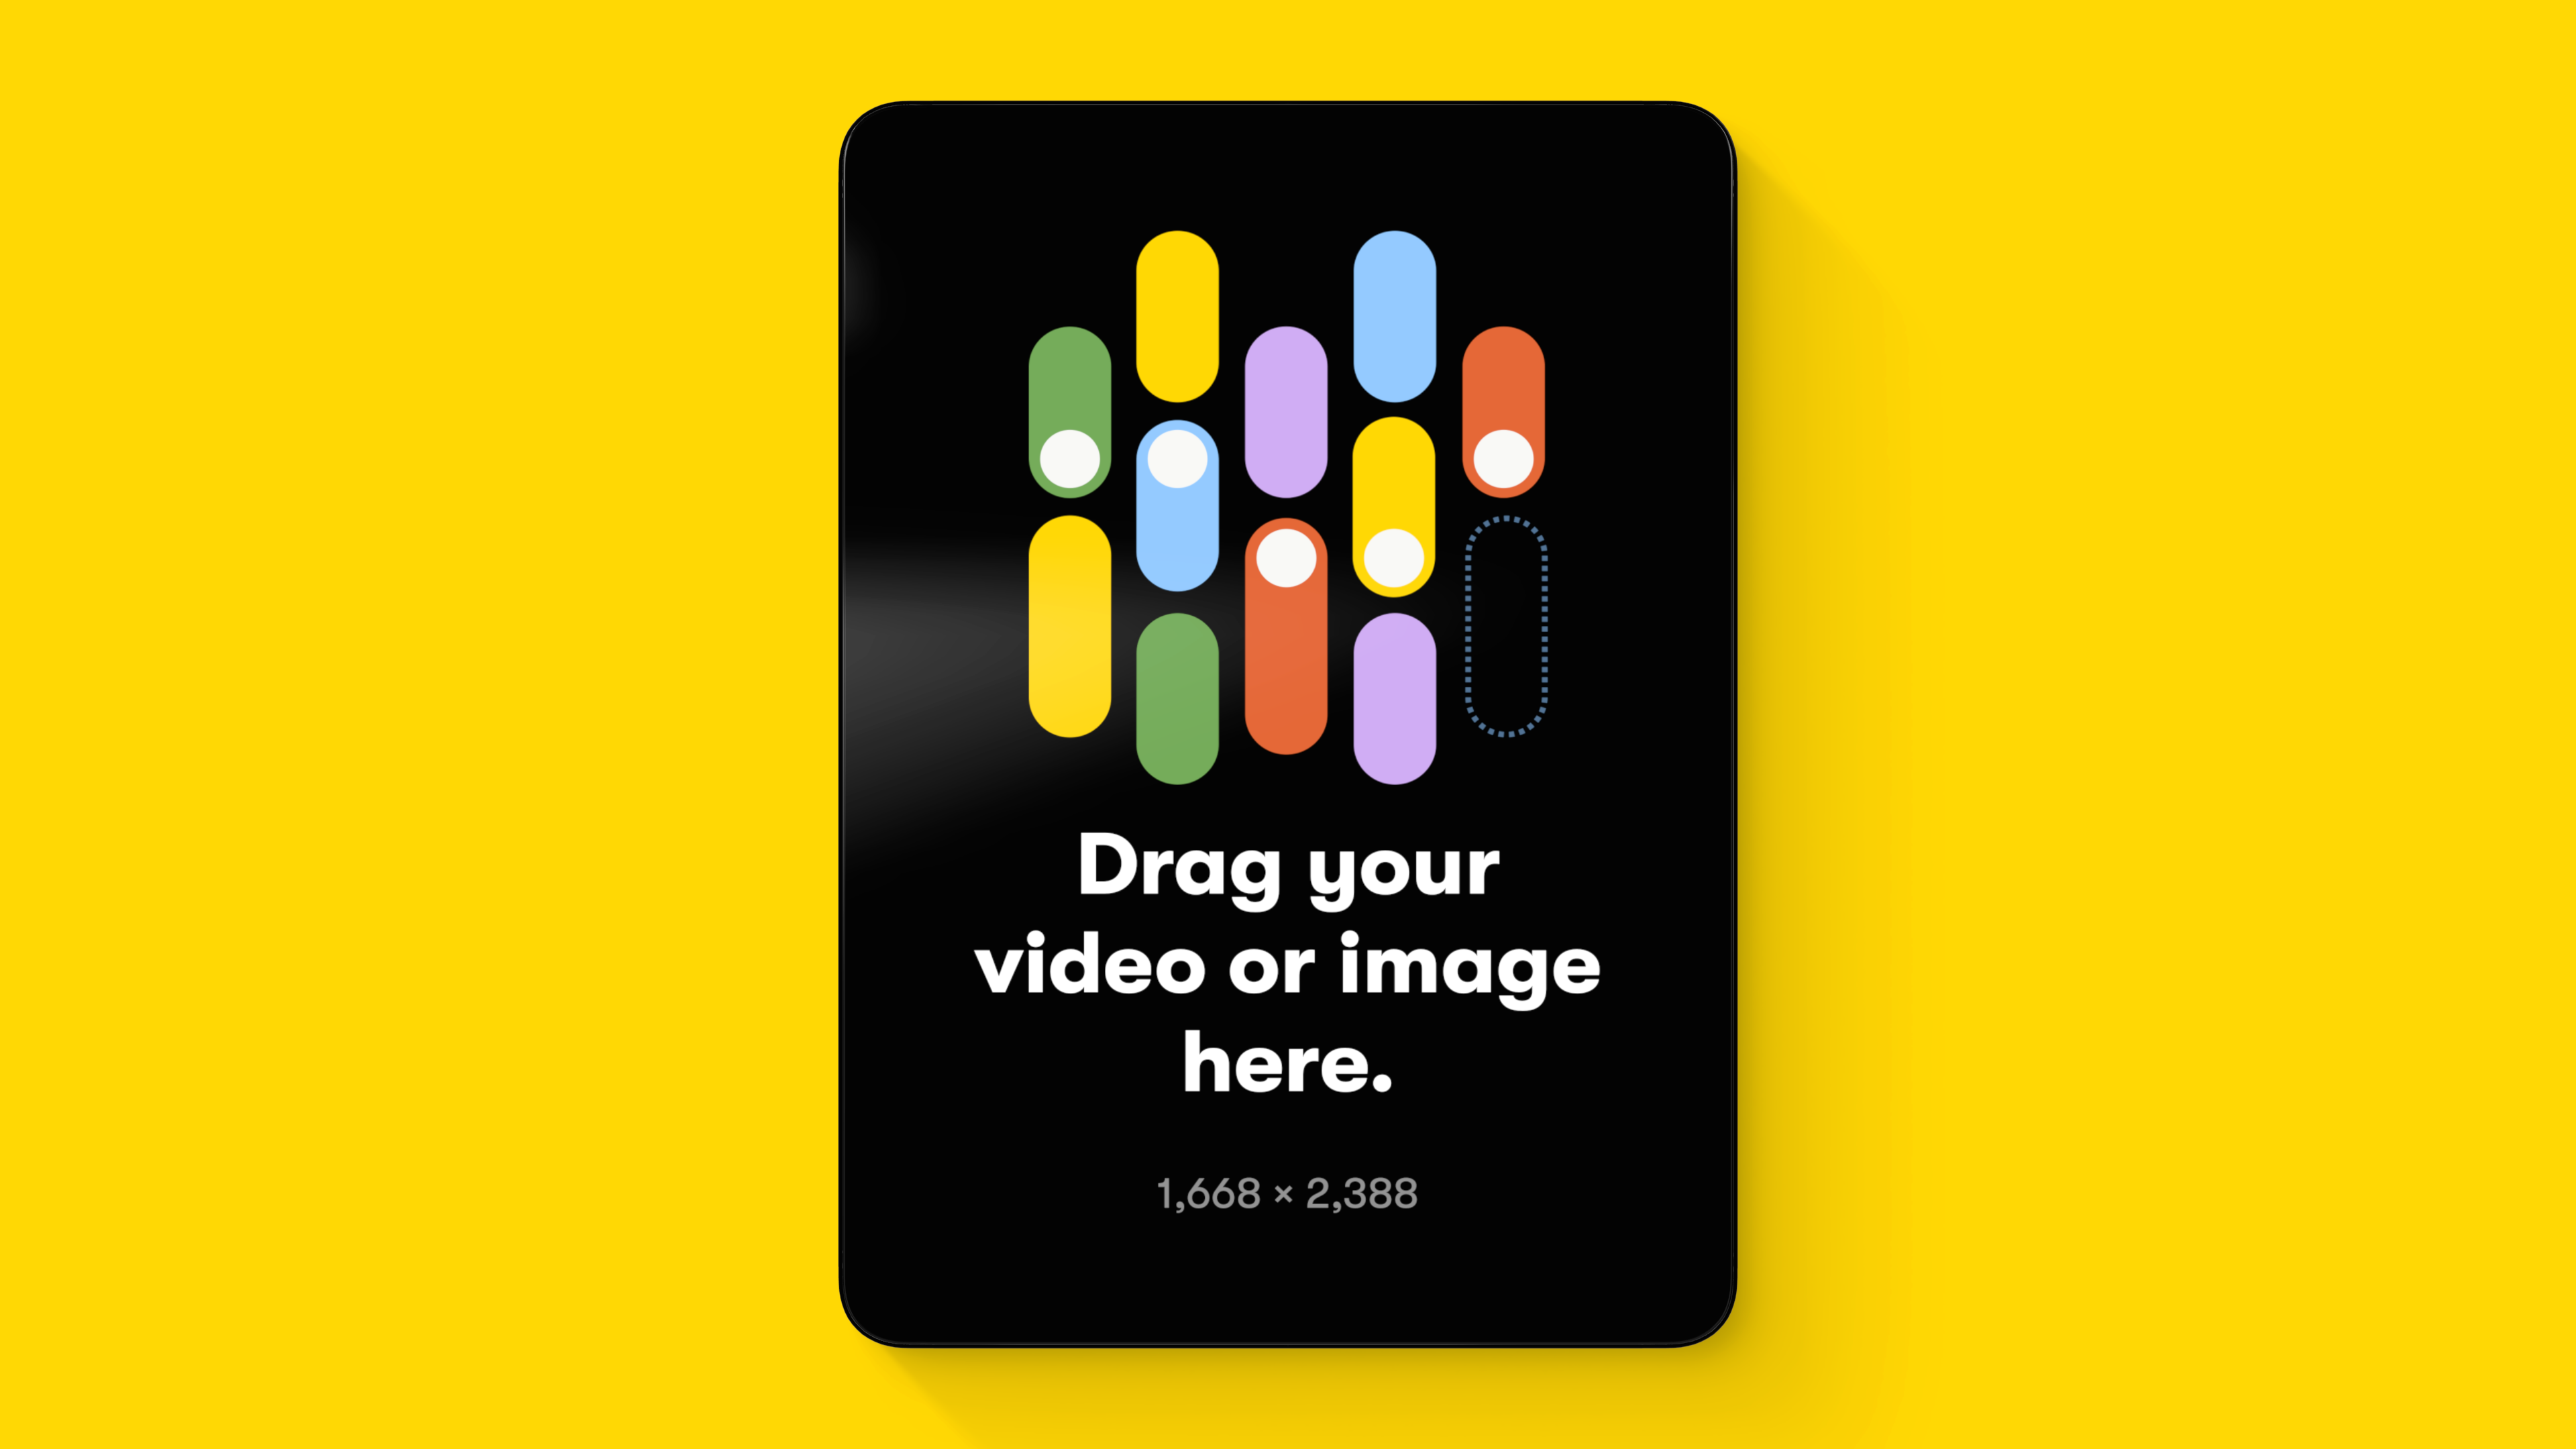 Customizable background images, videos and colors